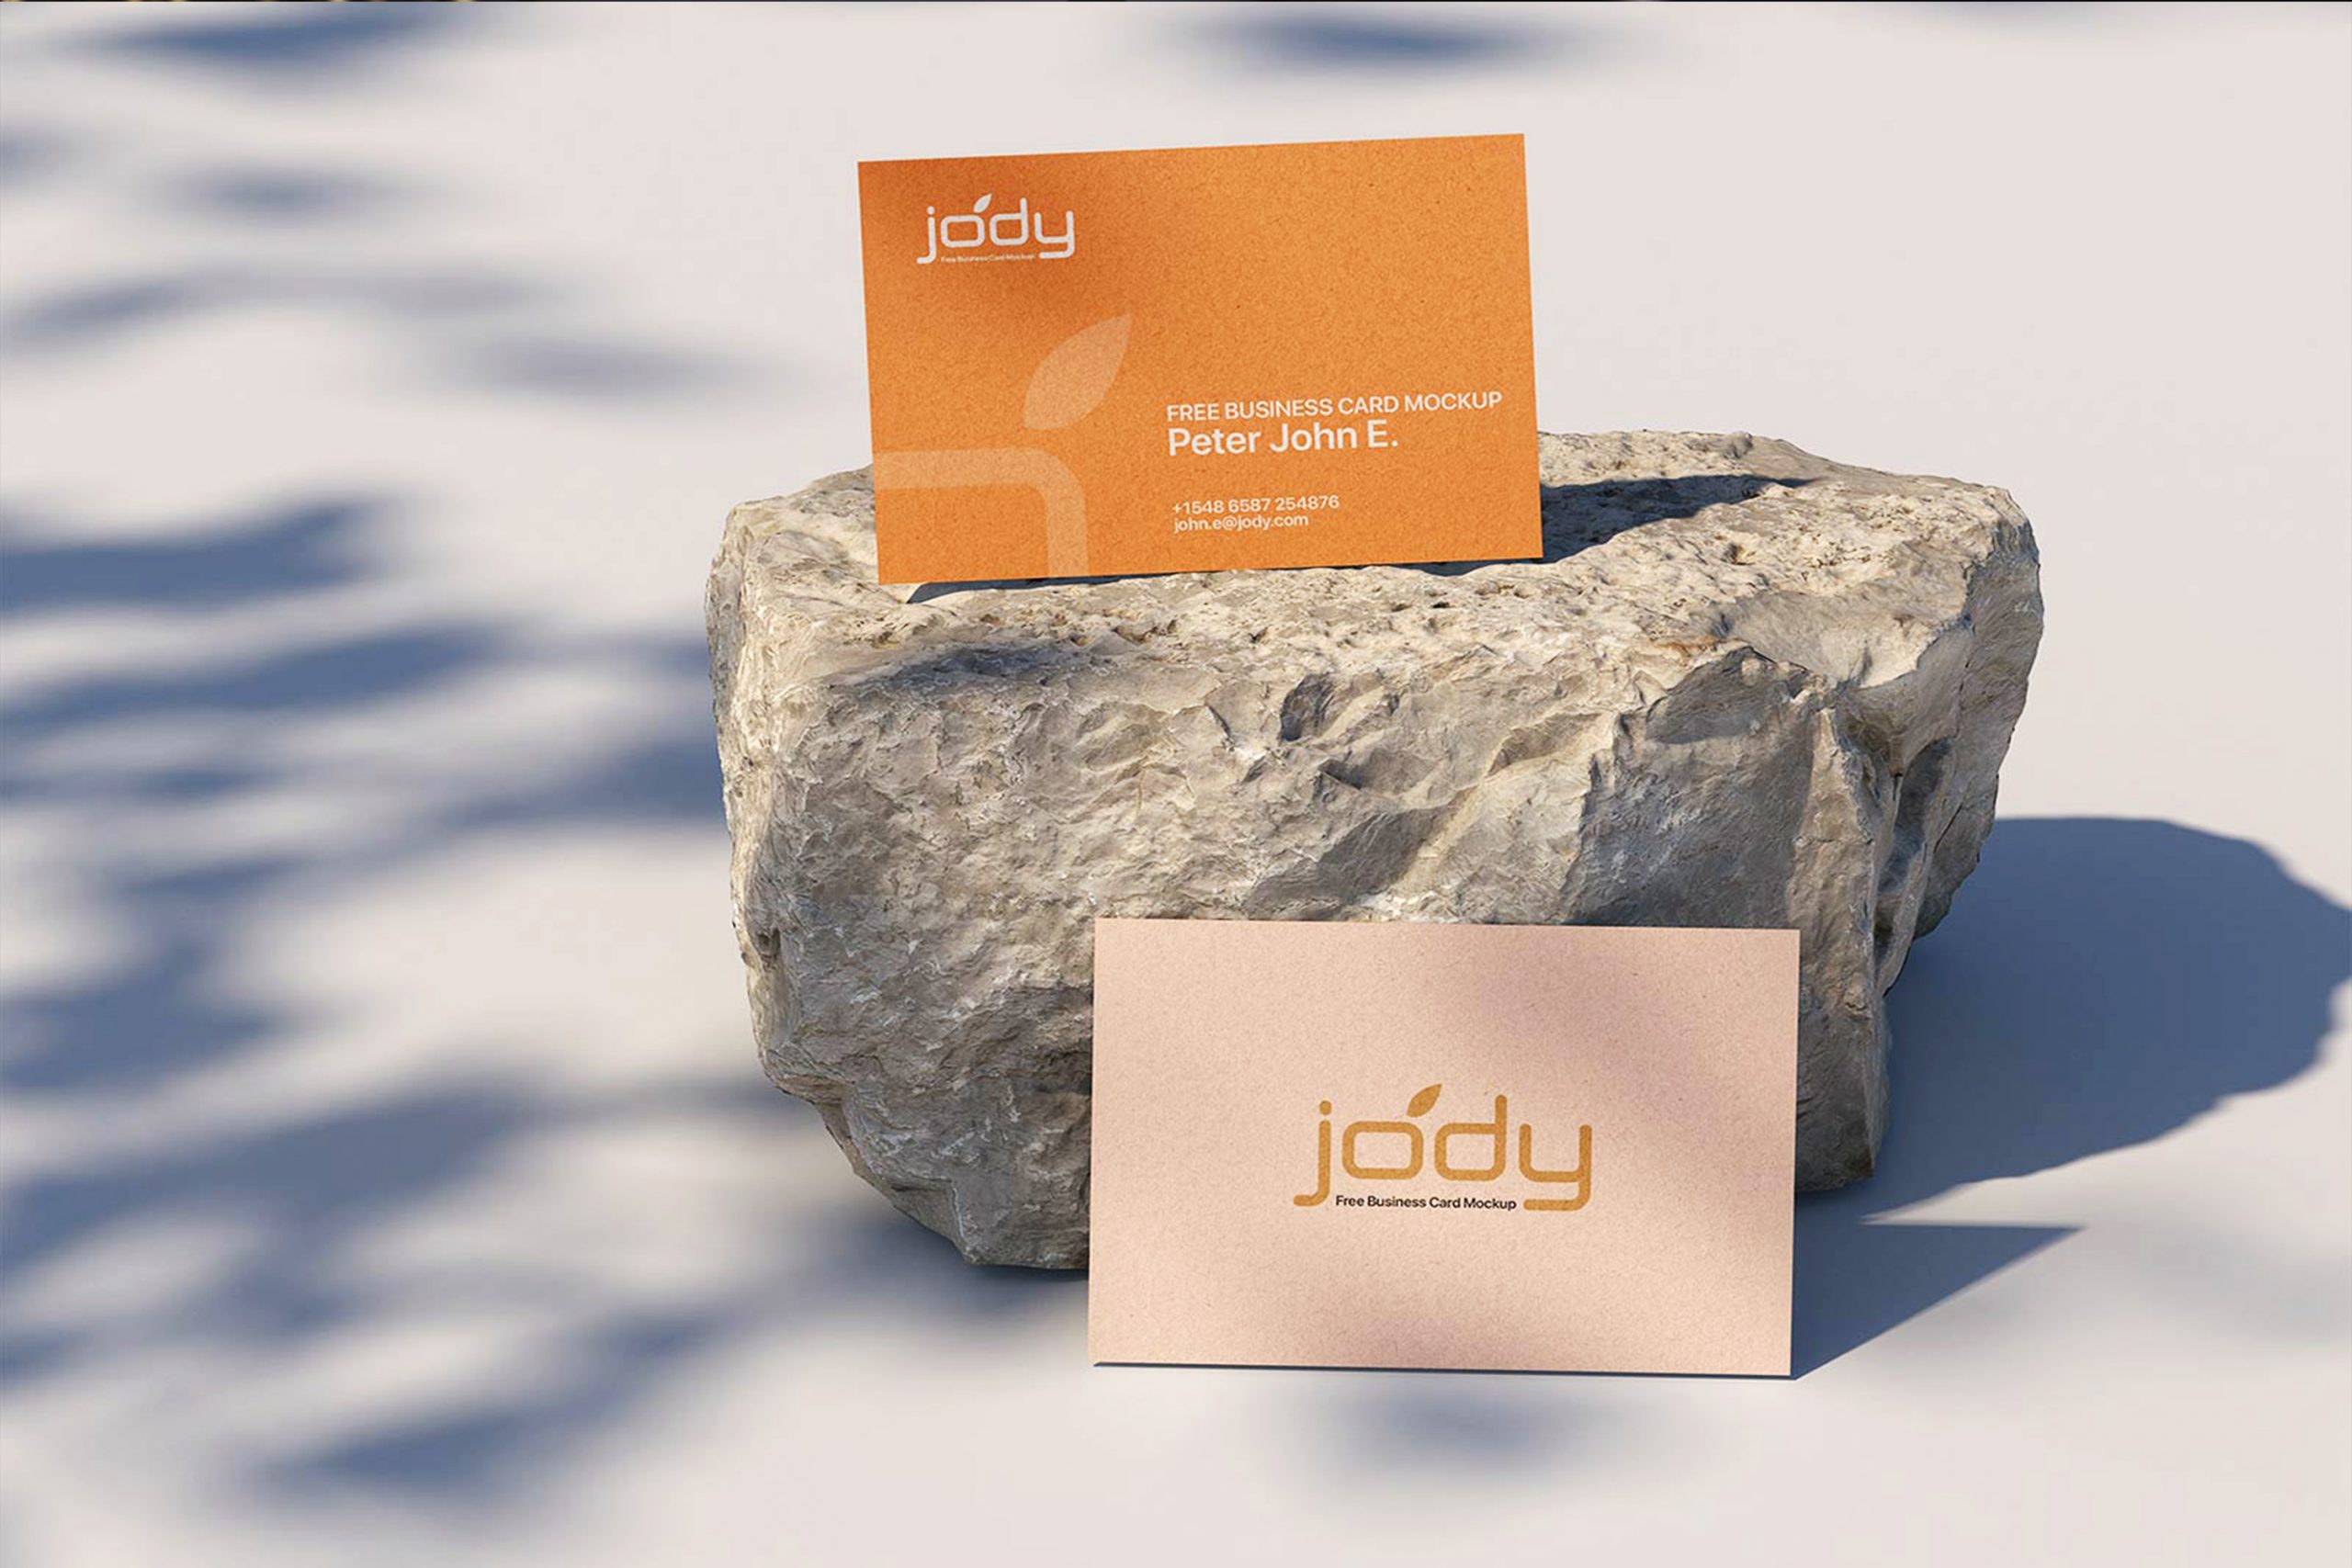 Business Card On A Stone Mockup Free Download